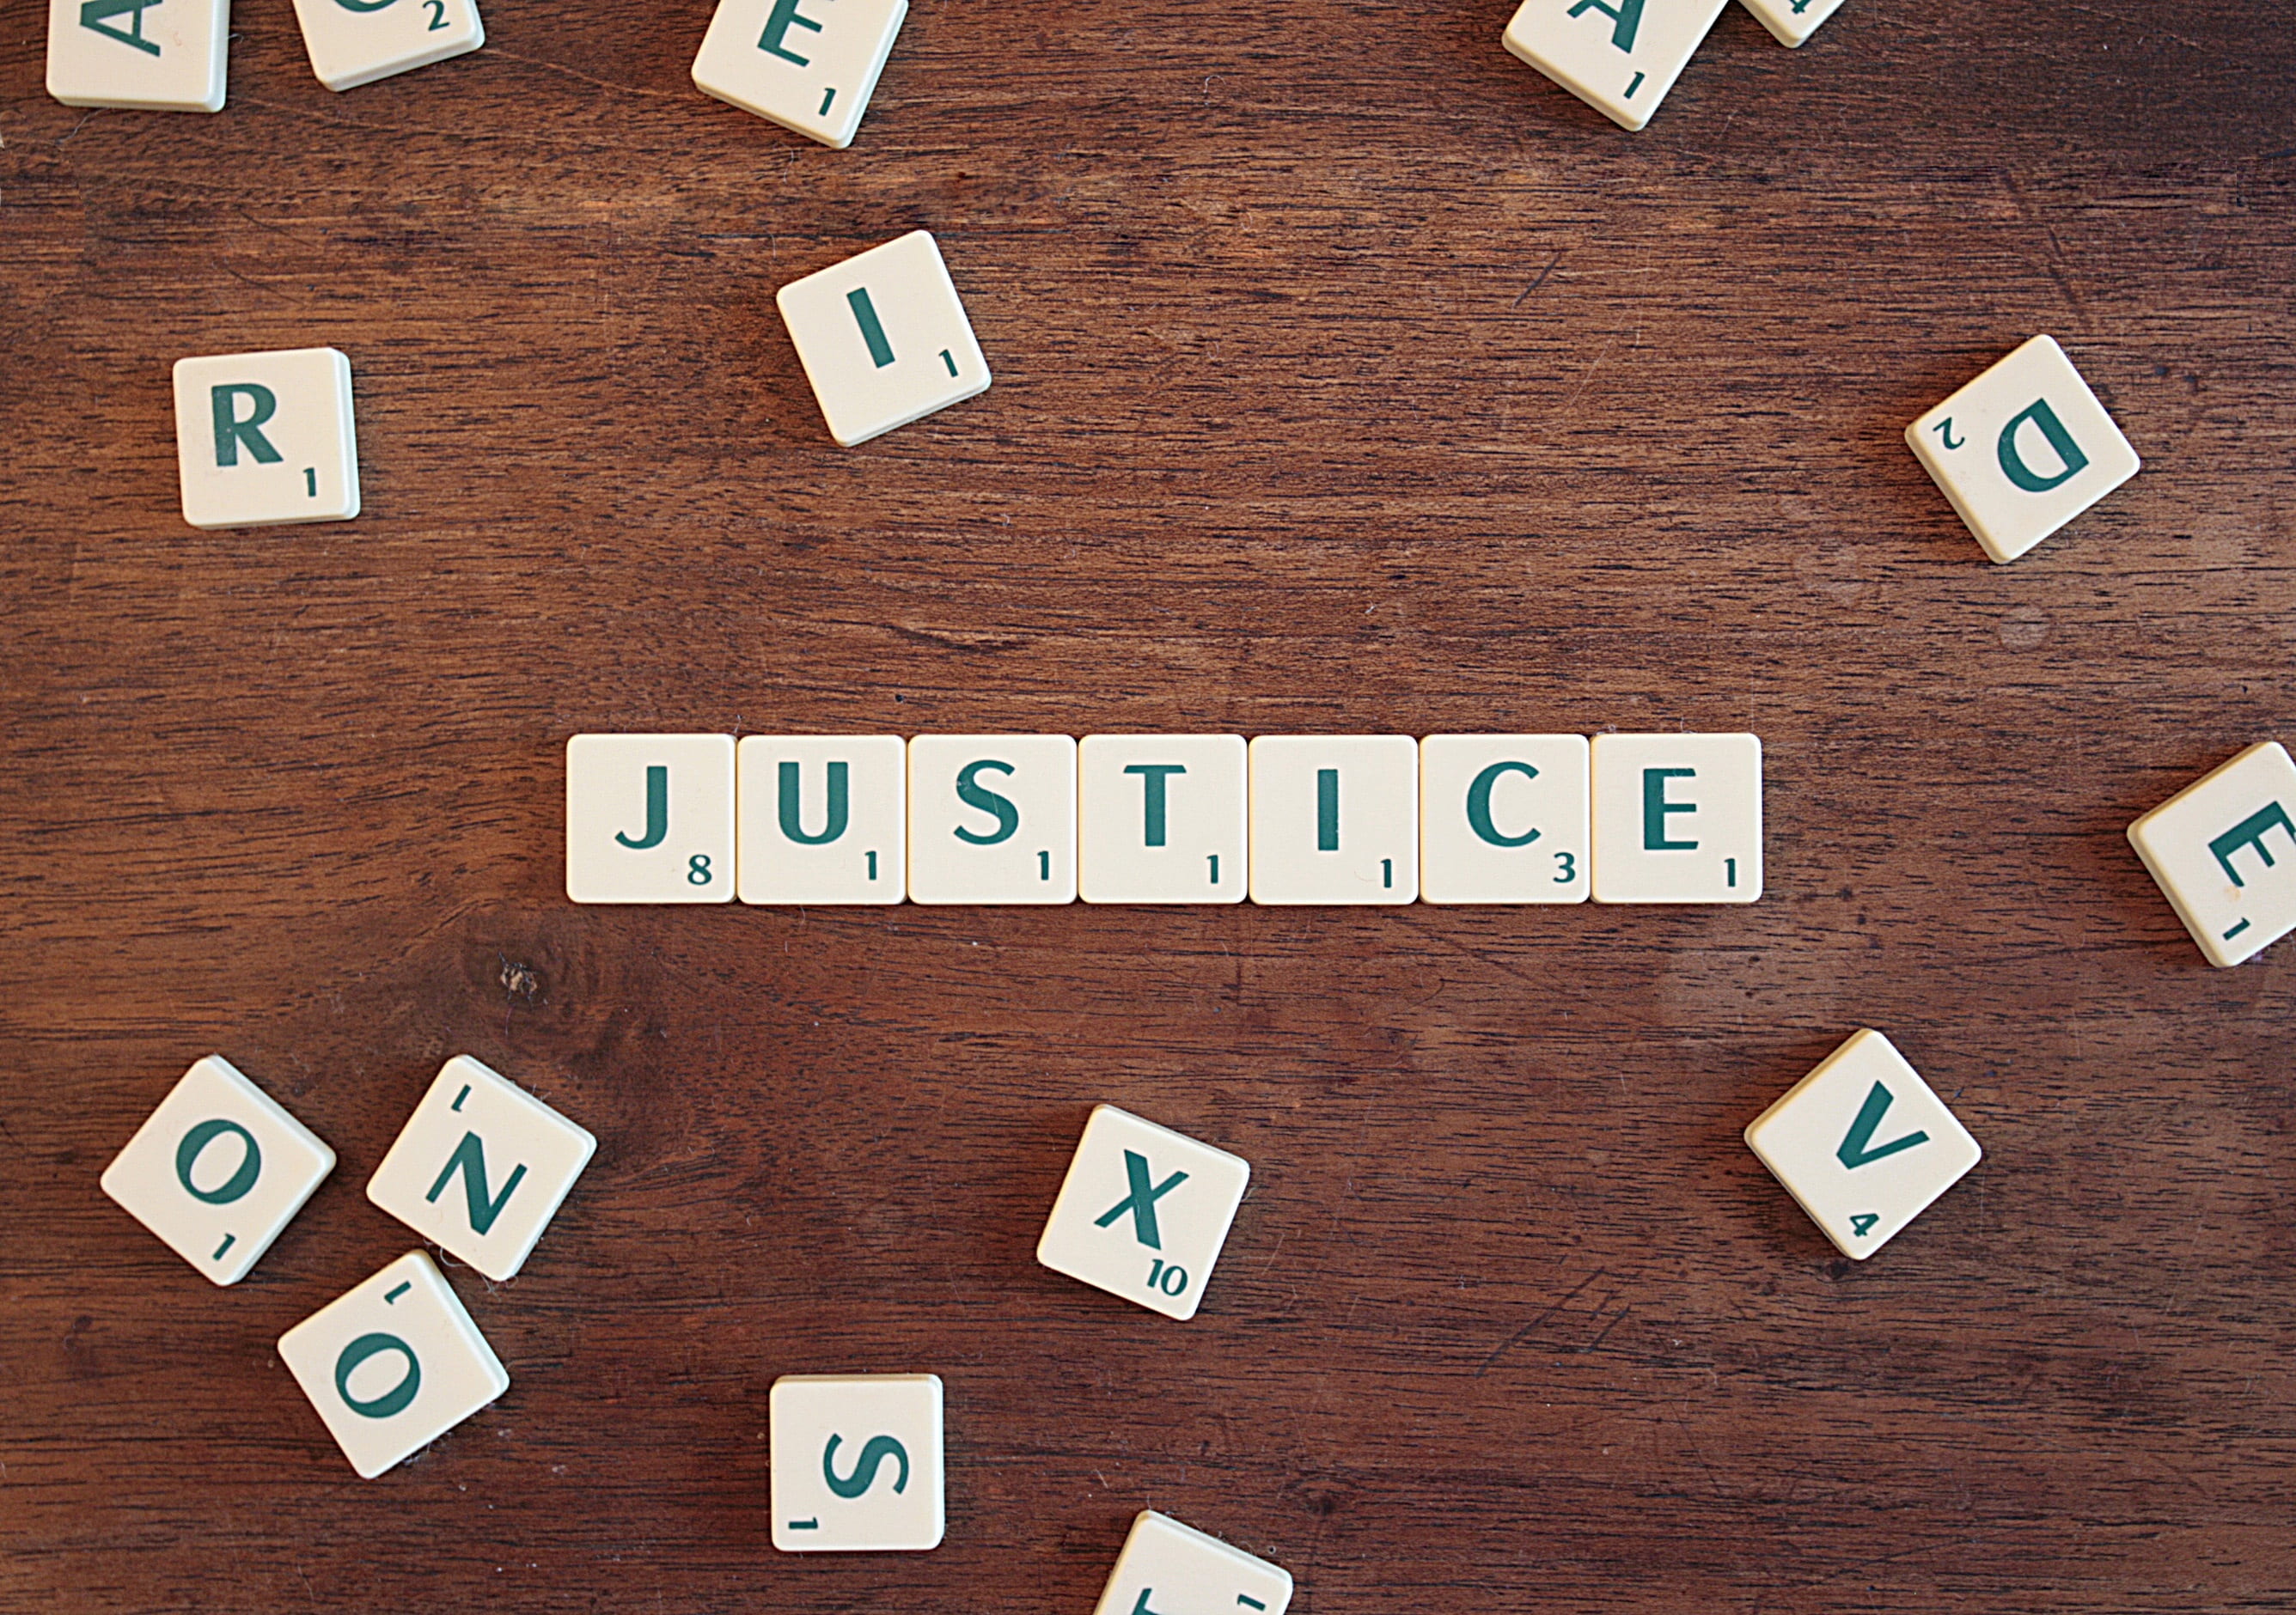 JUSTICE scrabble tile, right, legal, lawyer, word, letters, text